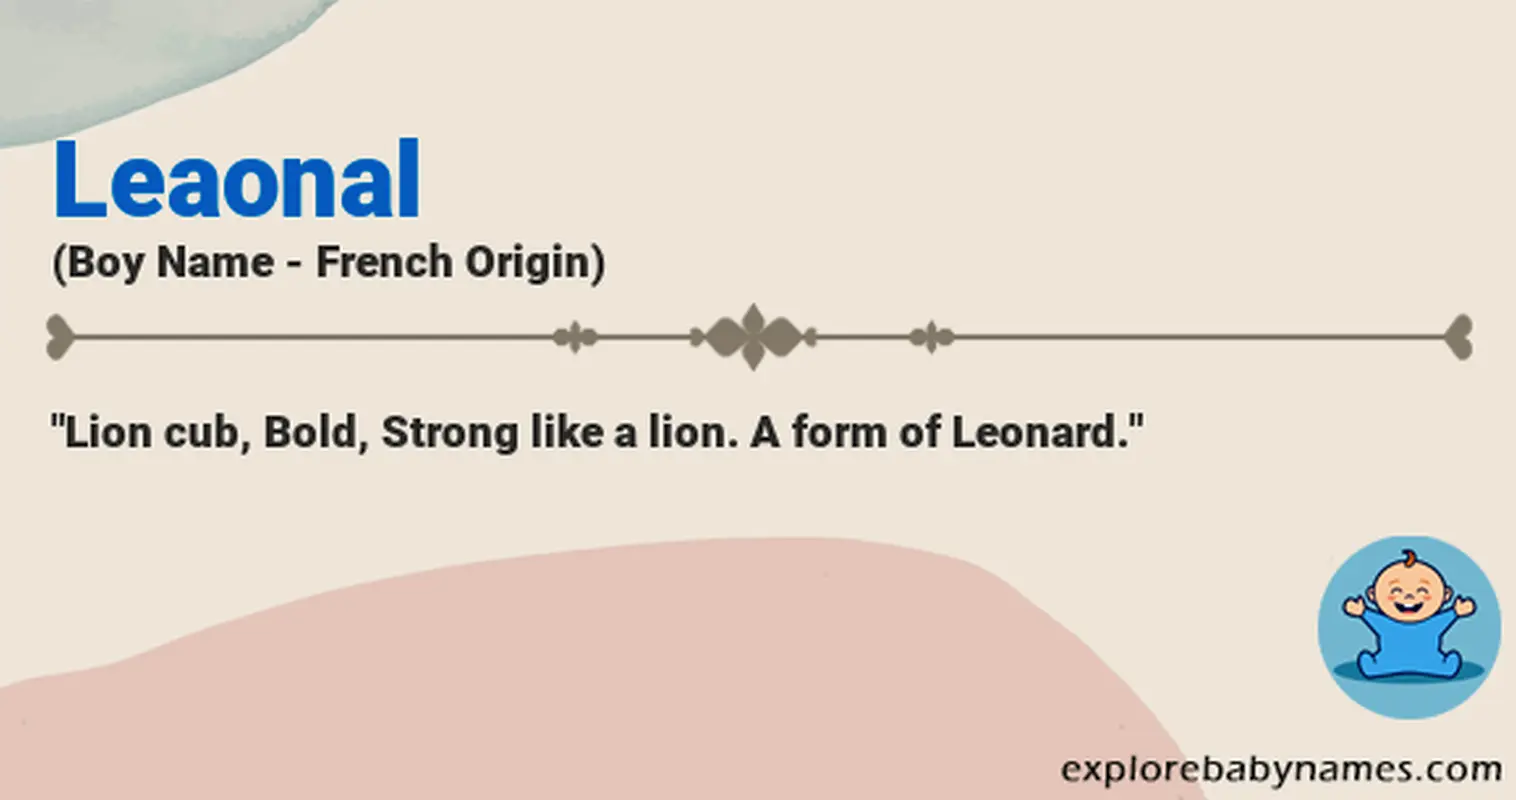 Meaning of Leaonal